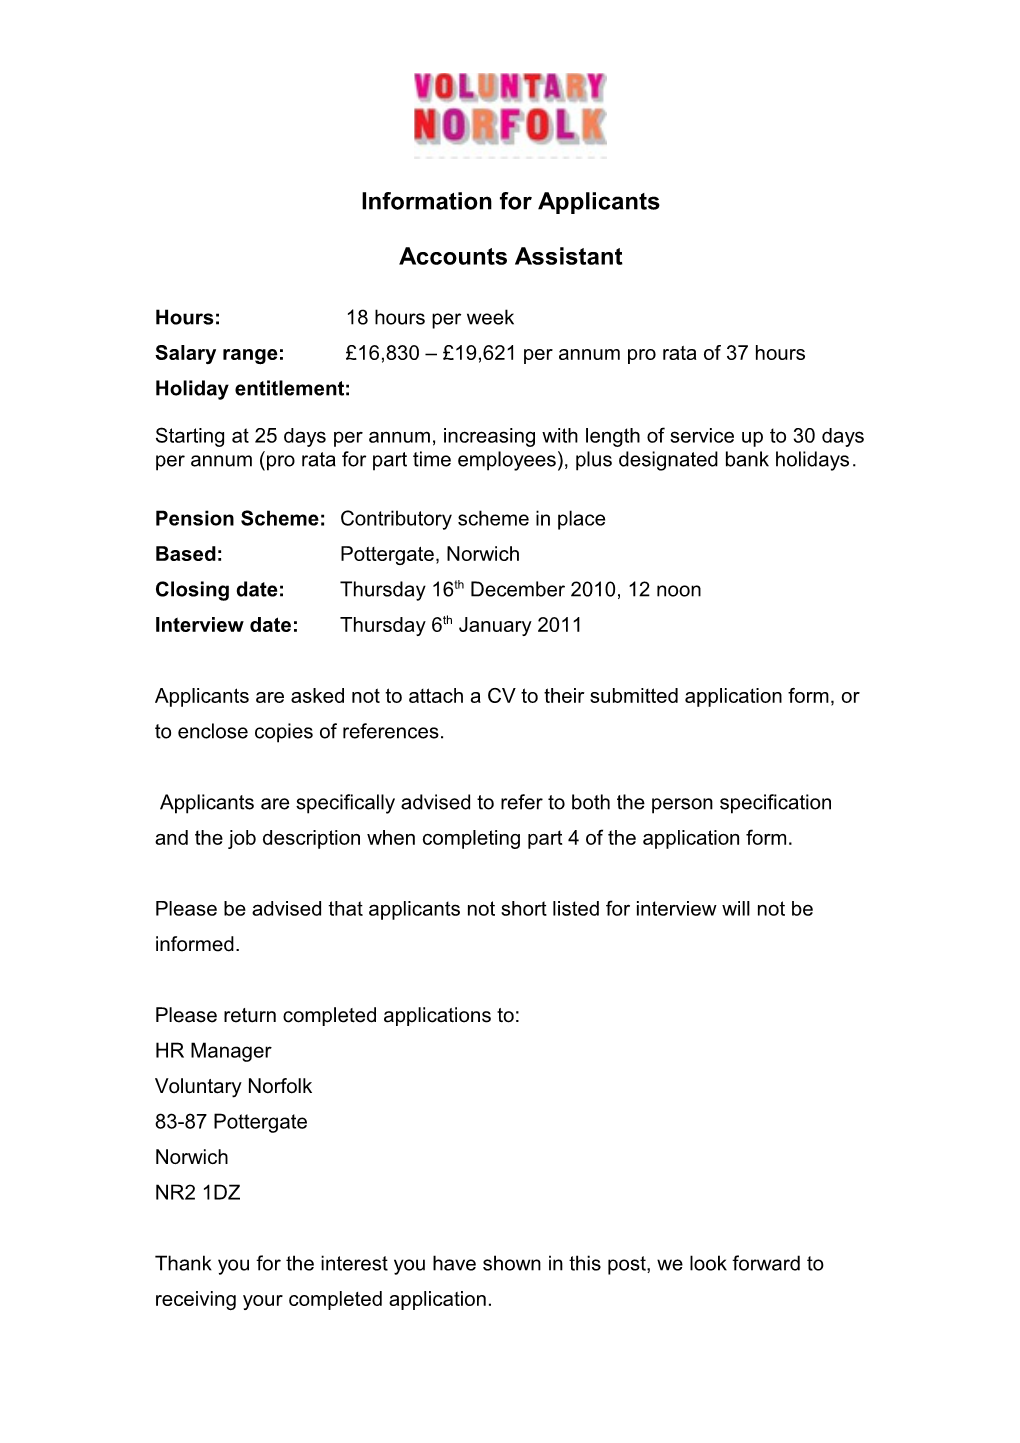 Information for Applicants s3